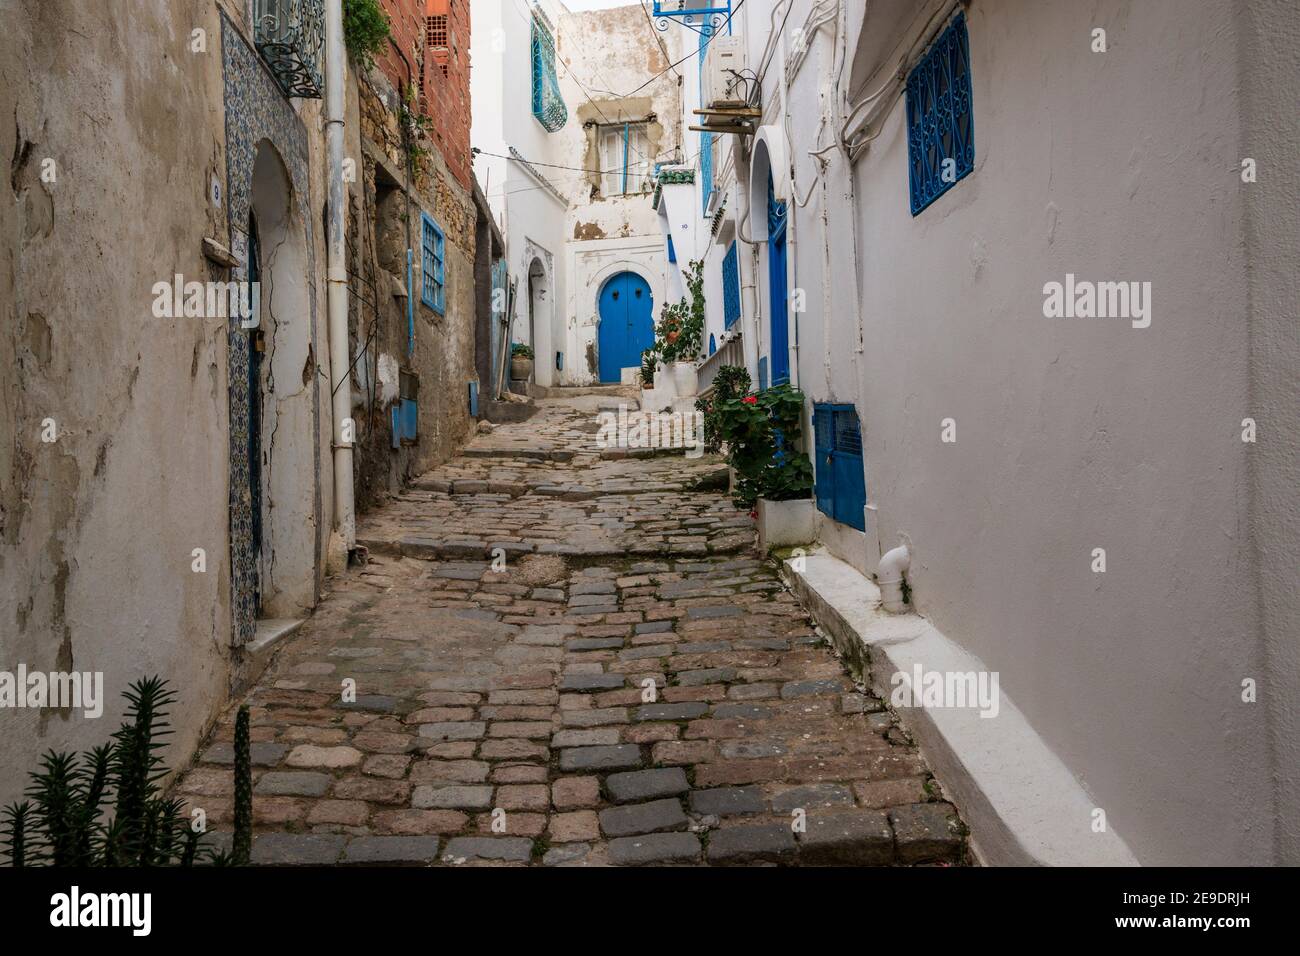 Traditional dwellings along a cobbled hillside street. Sidi Bou Said, the blue and white tourist village overlooking the Mediterranean Sea. Tunisia, Stock Photo